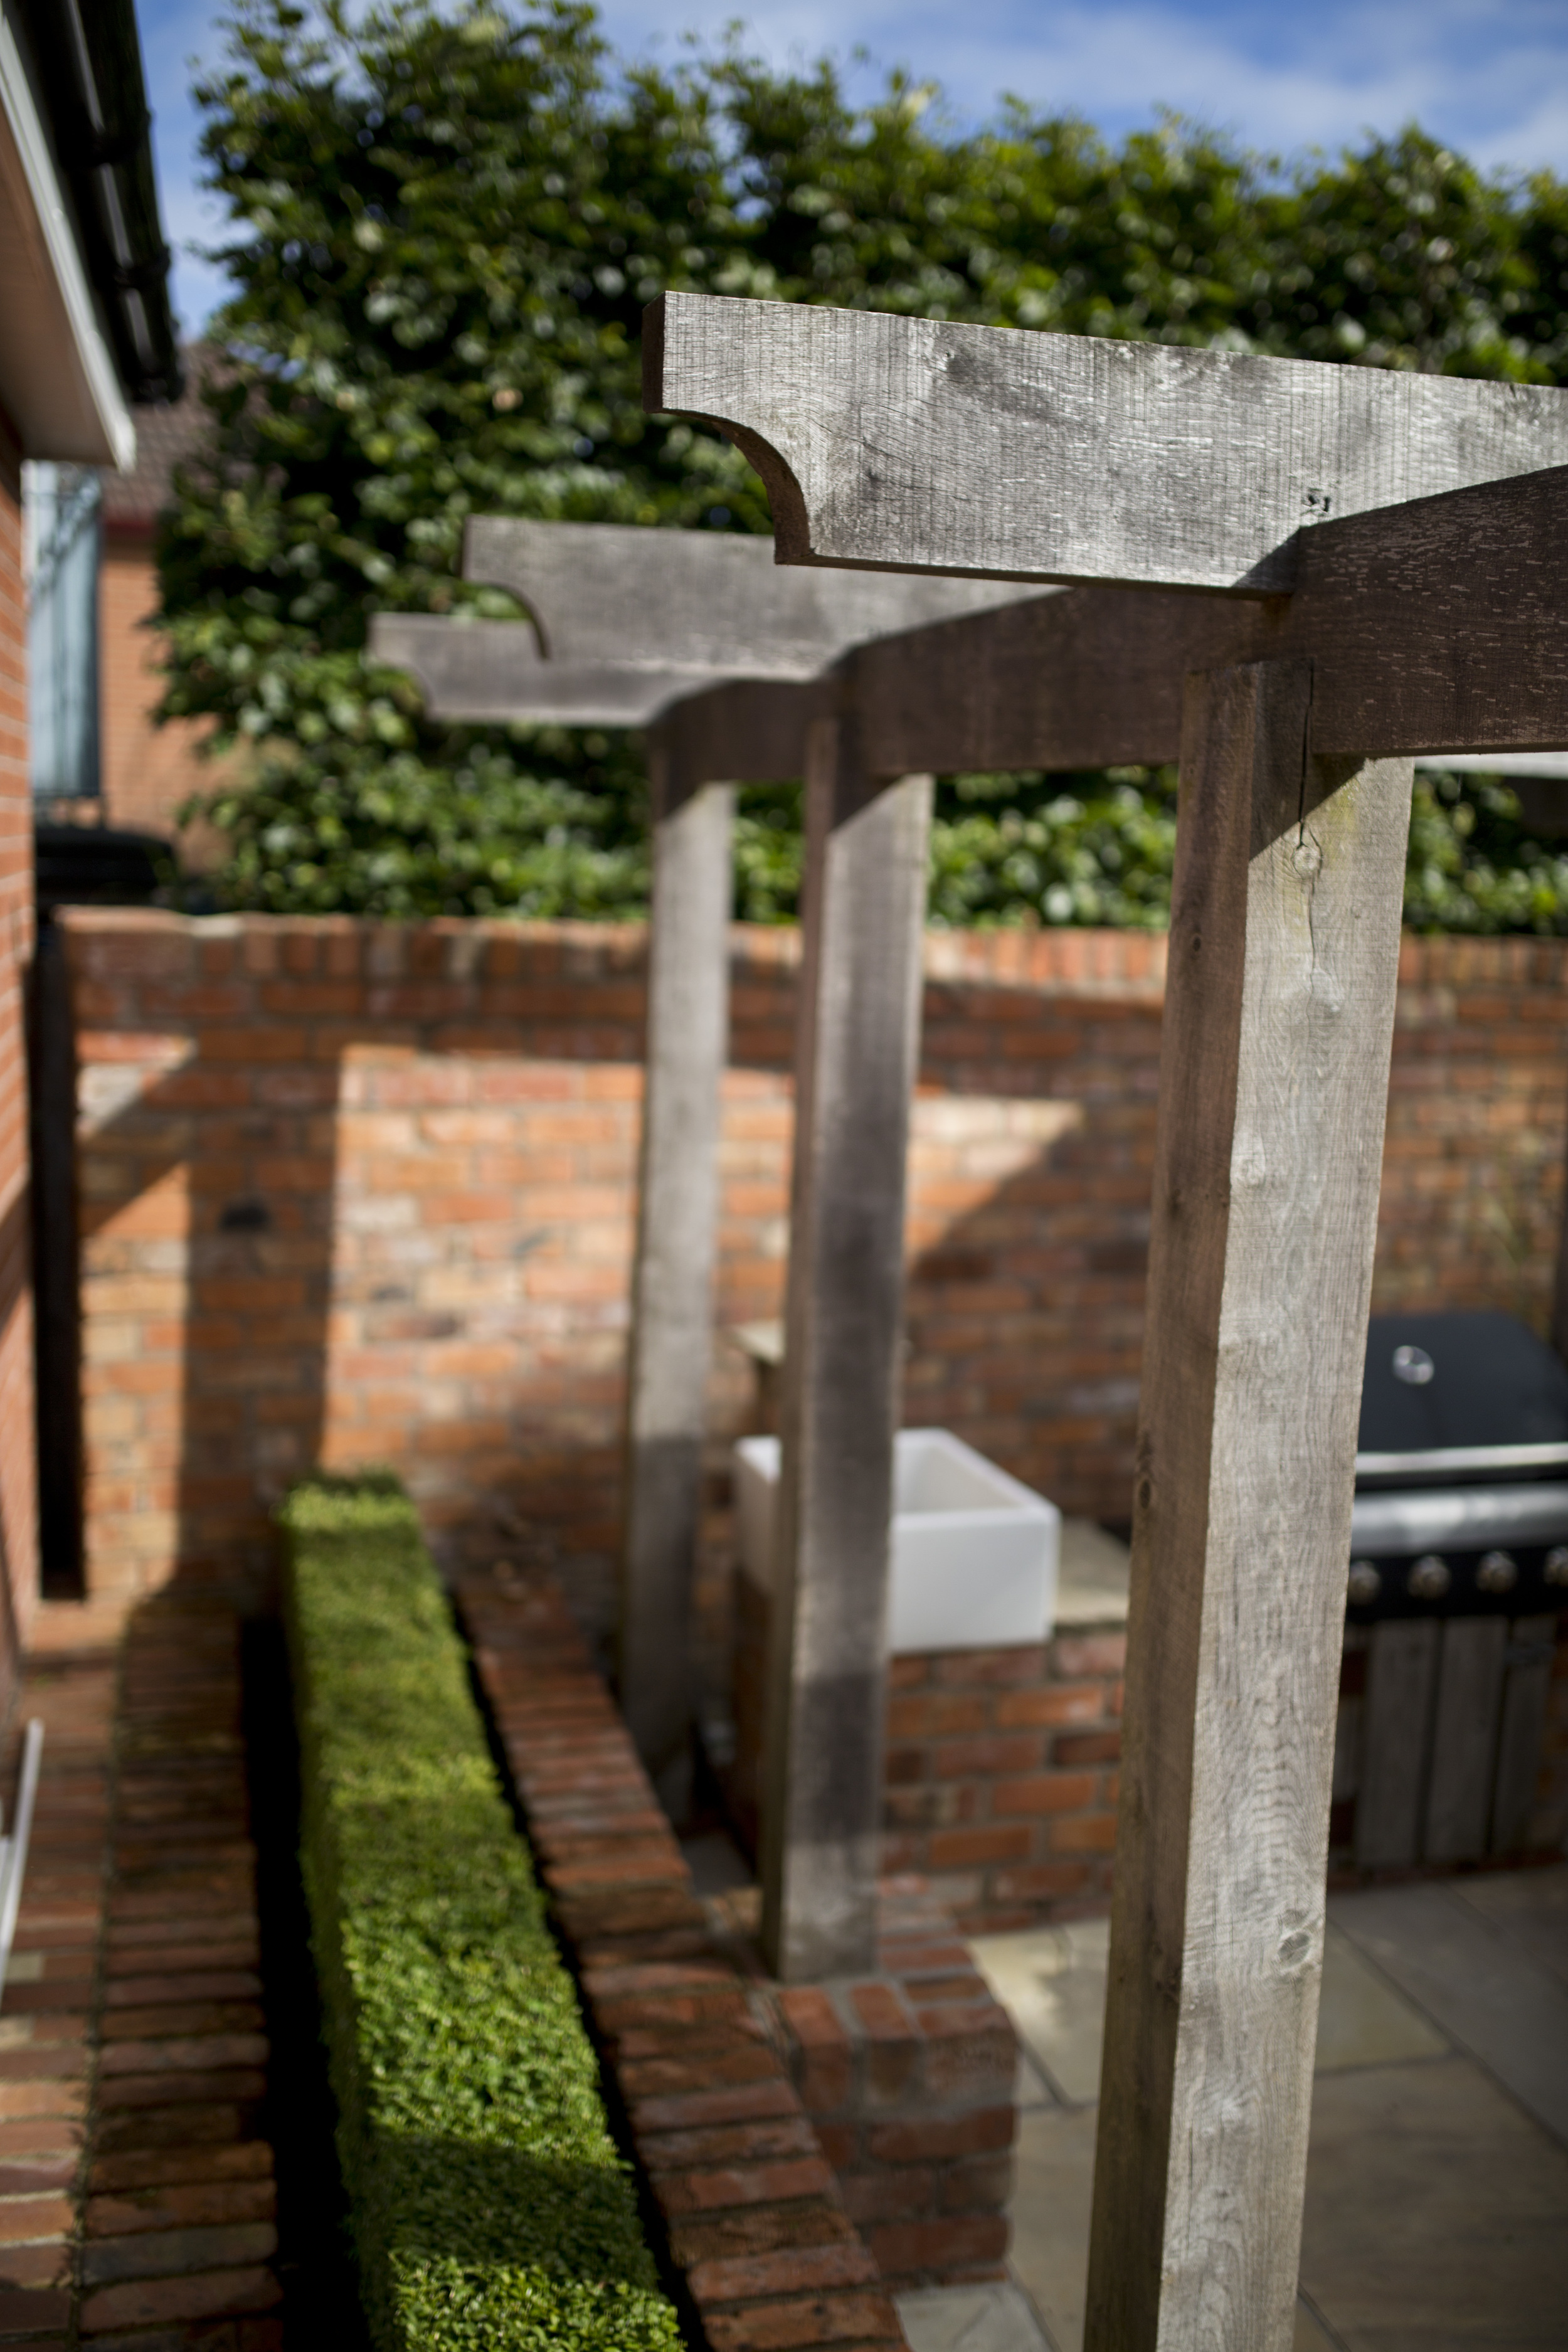 courtyard garden with oak pergola and belfast sink at bbq area